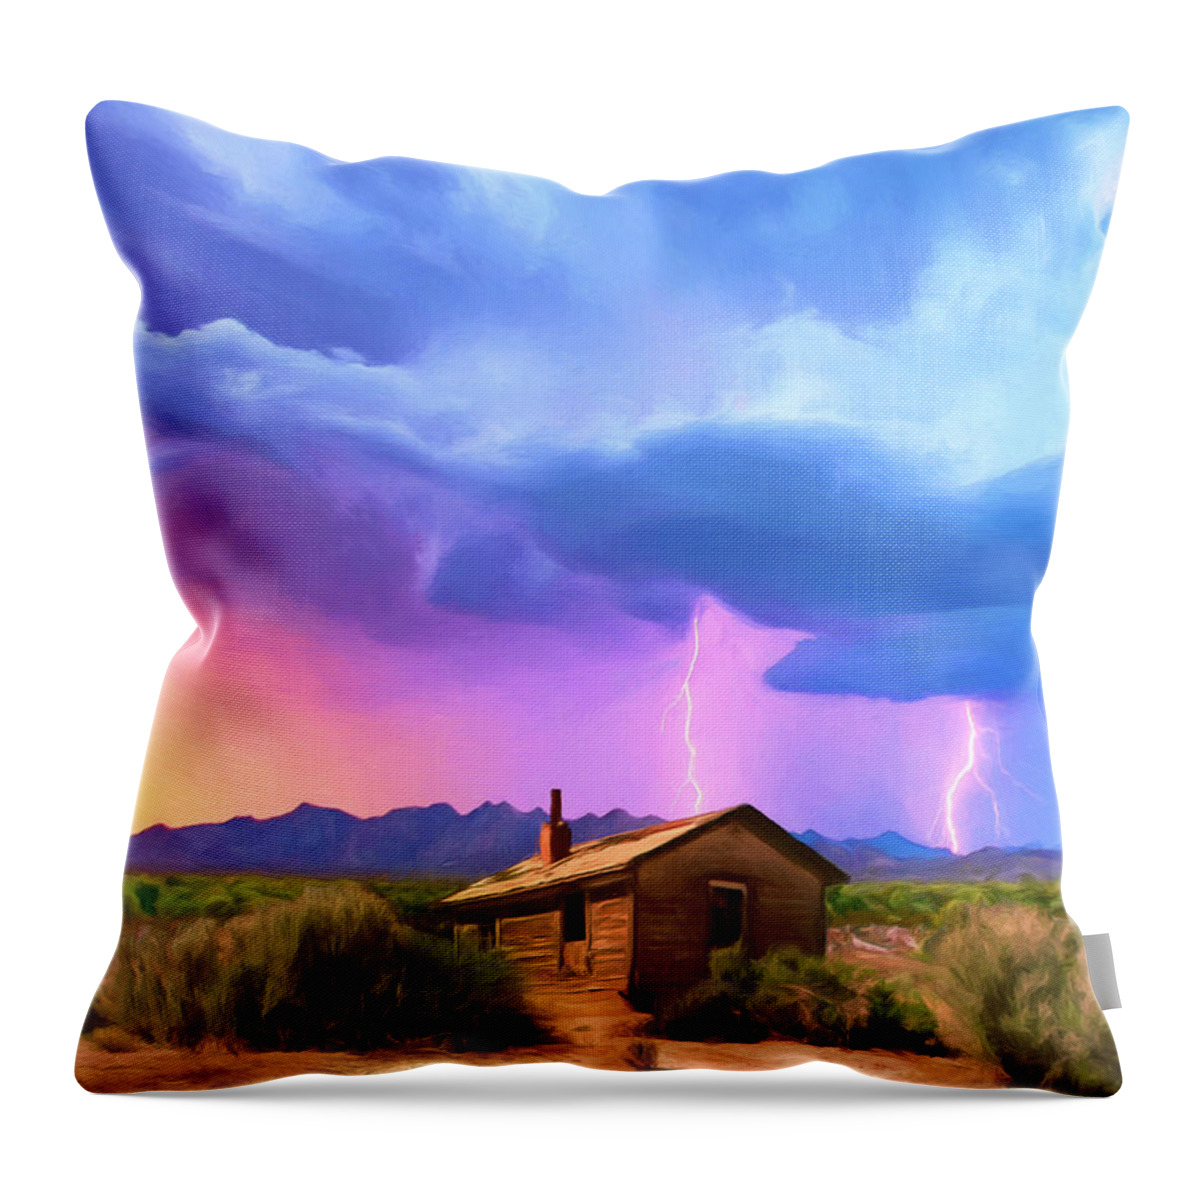 Desert Throw Pillow featuring the painting Summer Lightning by Dominic Piperata